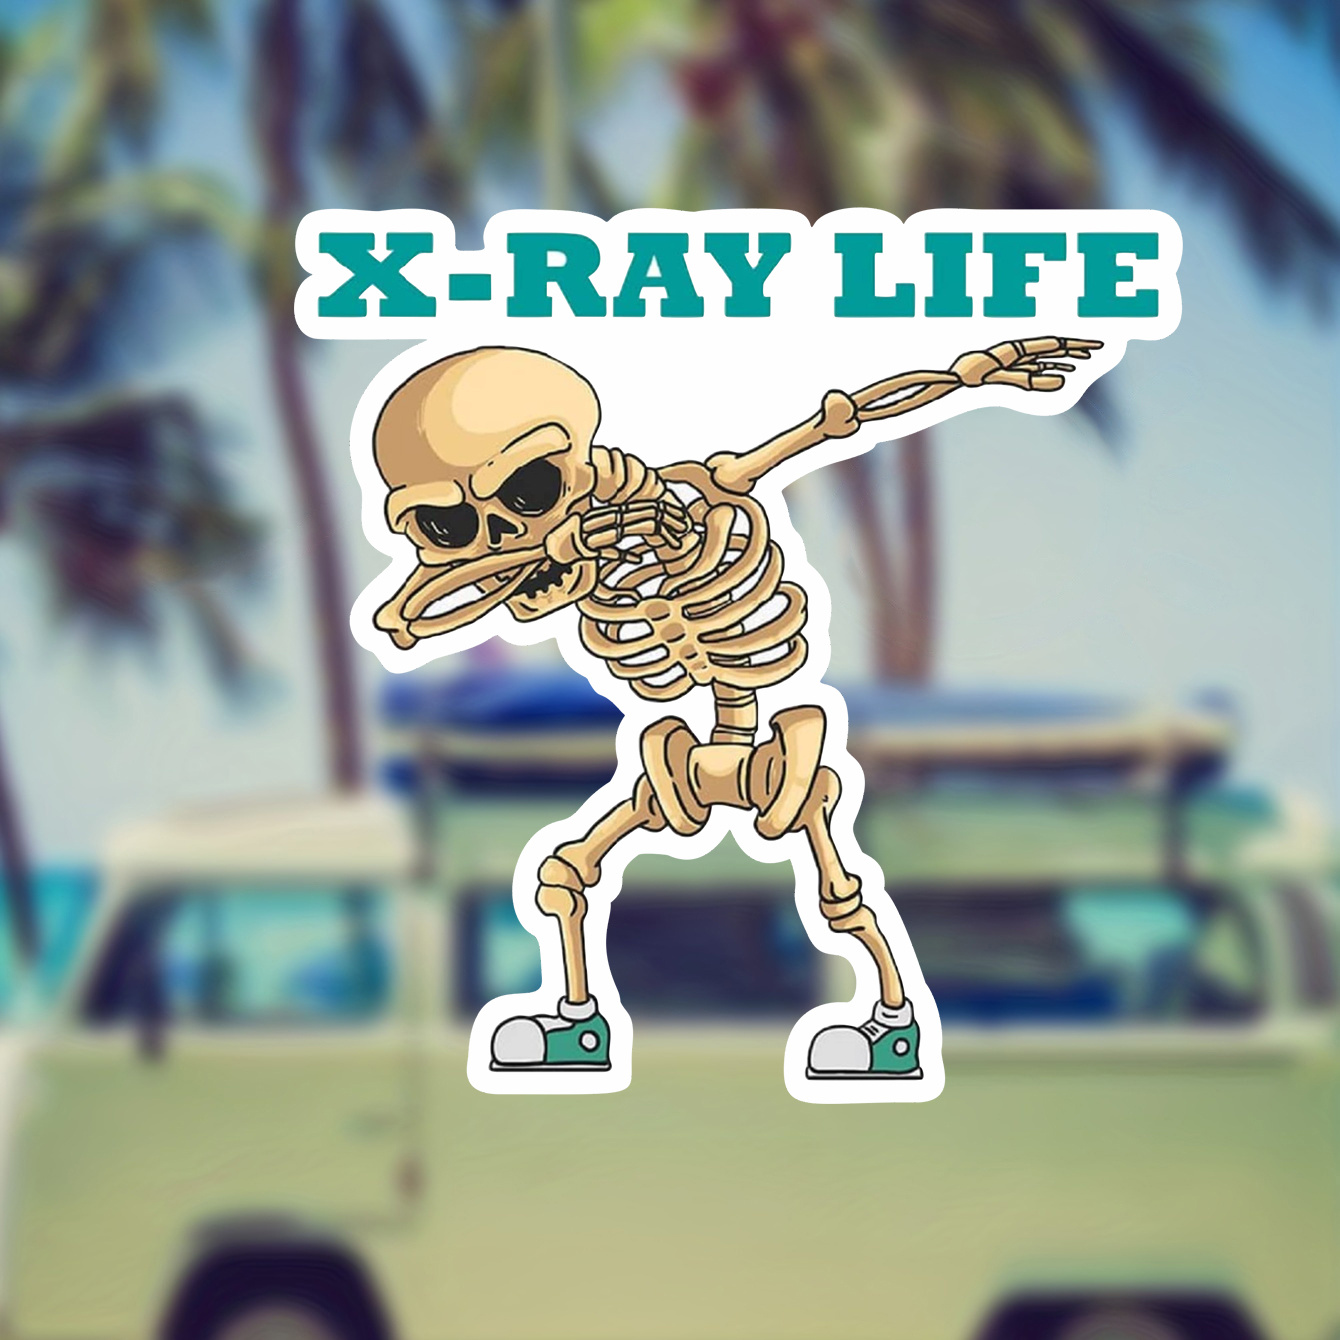 

X-ray Life Vinyl Sticker - Matte Finish, Cartoon & Fantasy Designs For Laptops, Water Bottles, Cars & More | Durable, Easy Apply Decal